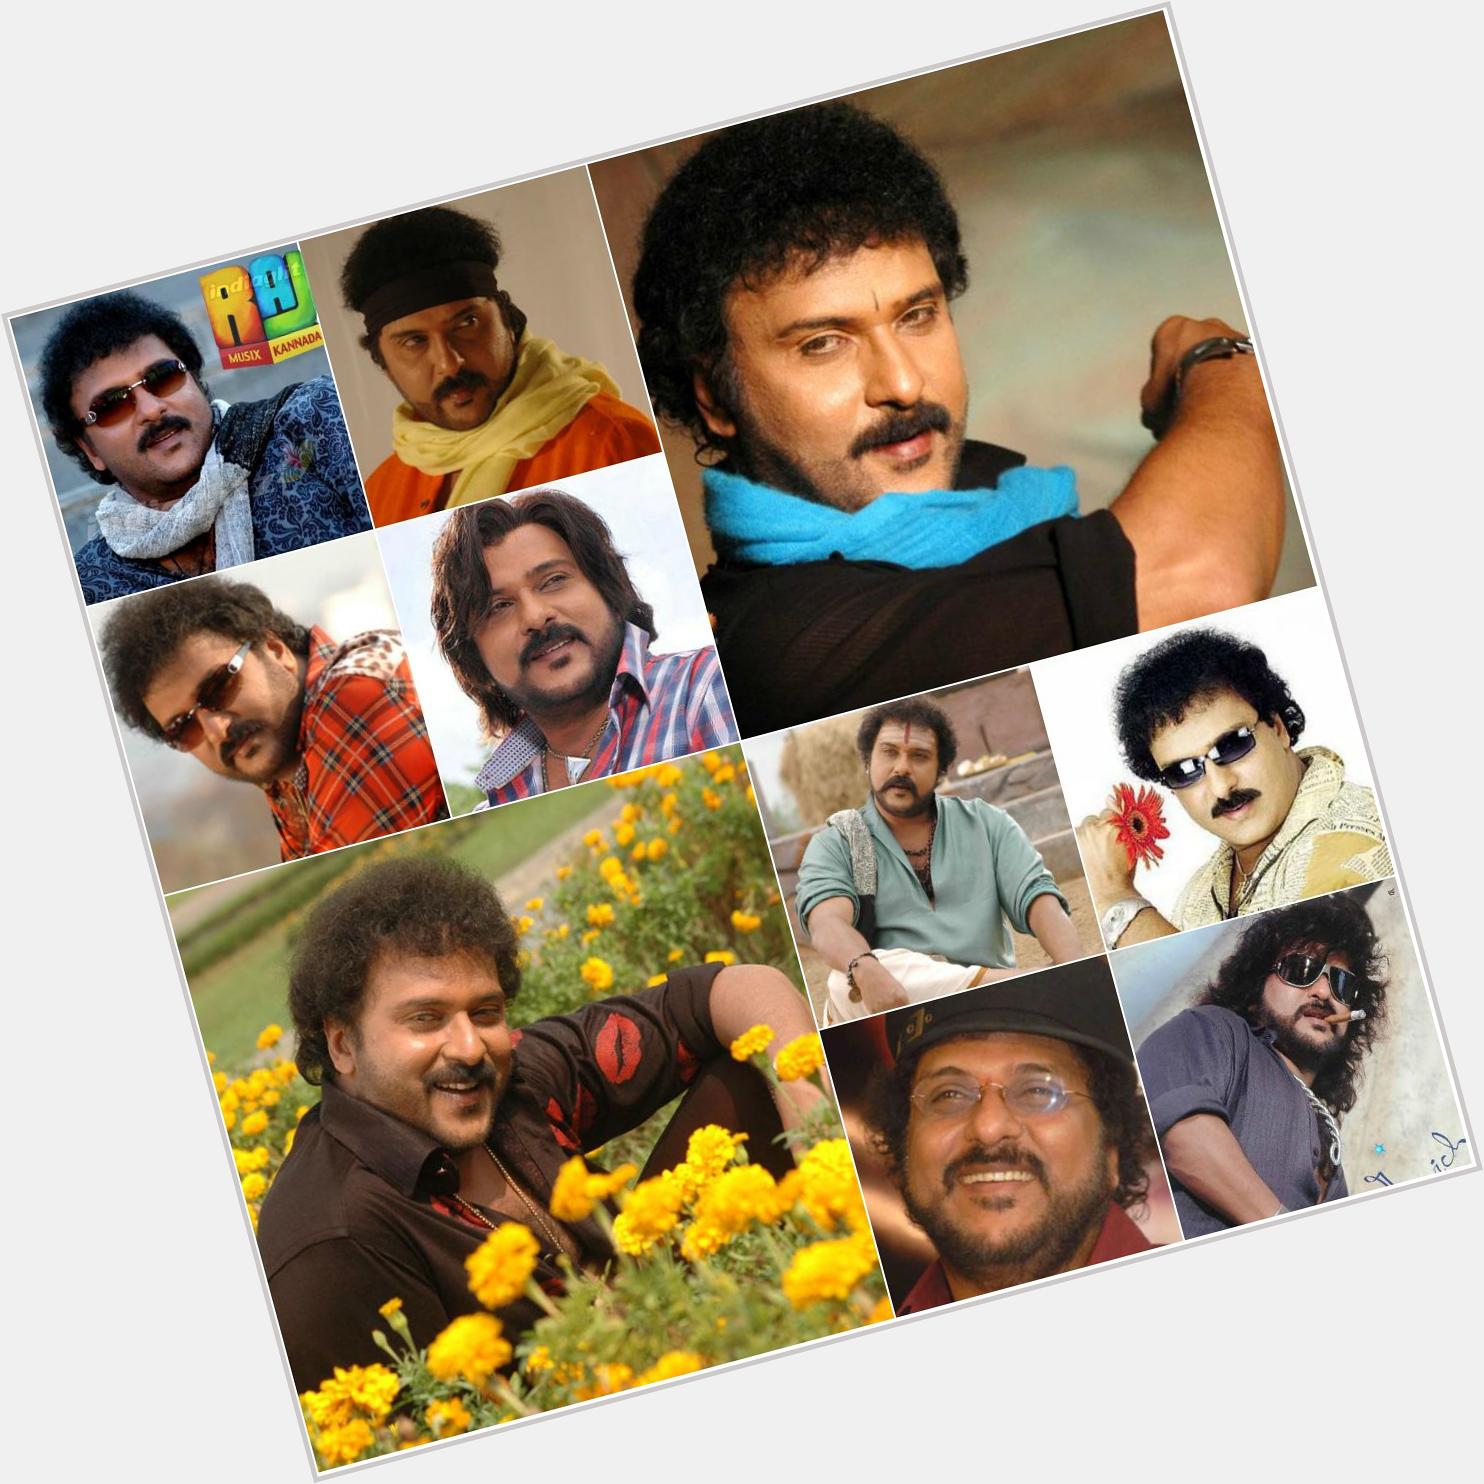 YOU\RE SPECIAL
 SO YOUR BIRTHDAY 
 IS A VERY SPECIAL DAY..... 
 Wishing a very Happy Birthday to V.Ravichandran.... 